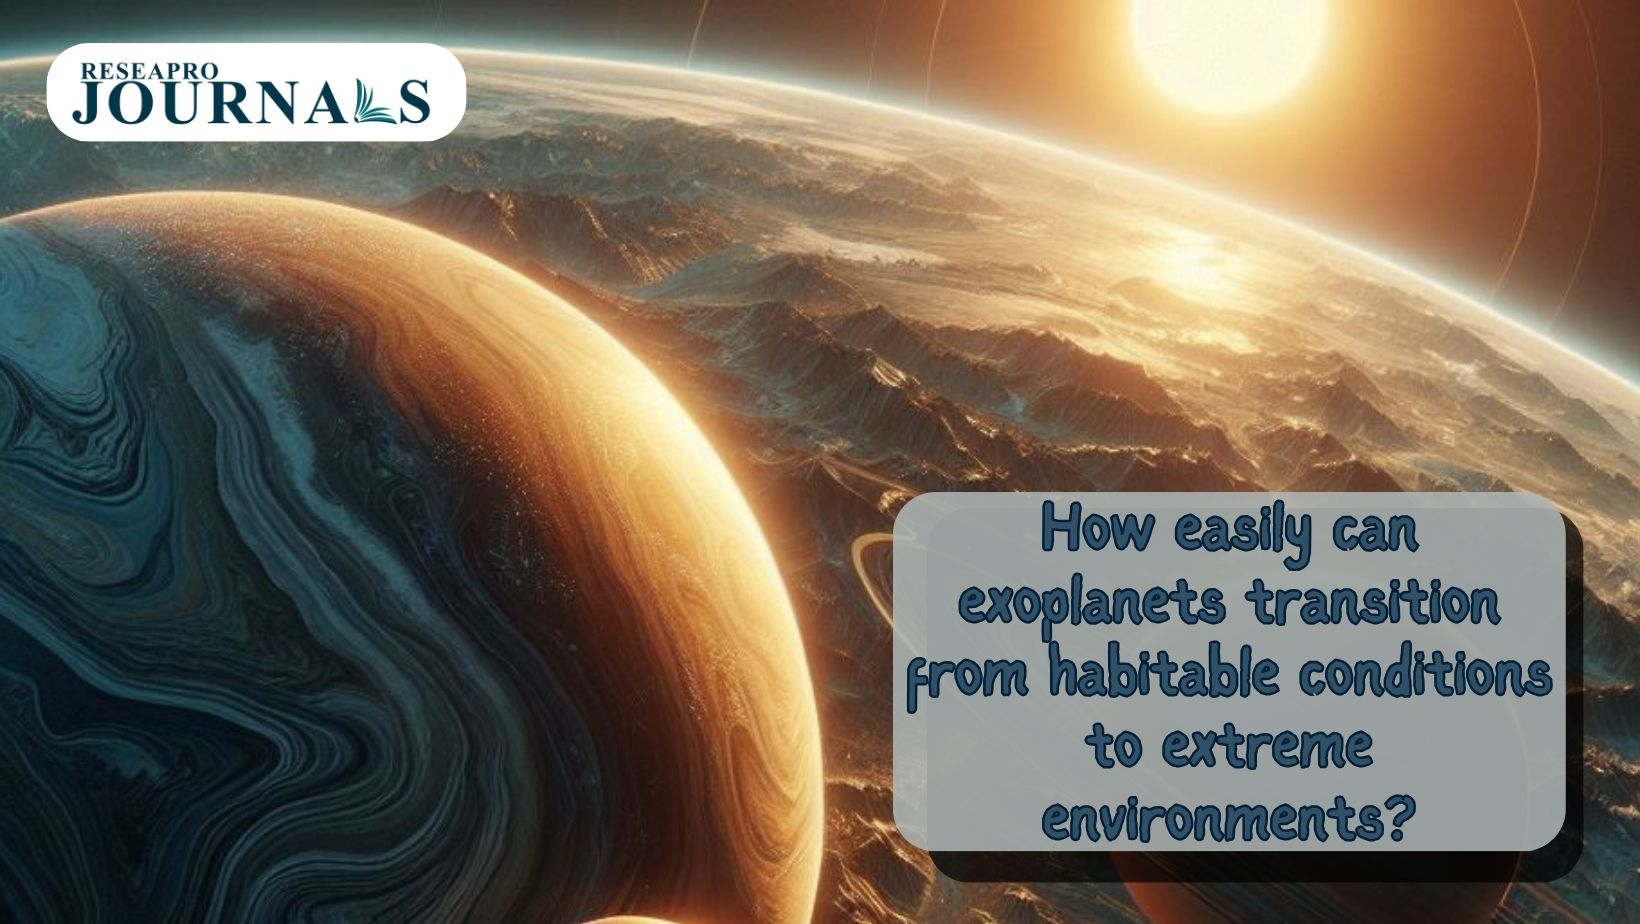 Exoplanets’ delicate balance: habitable to hostile in moments.